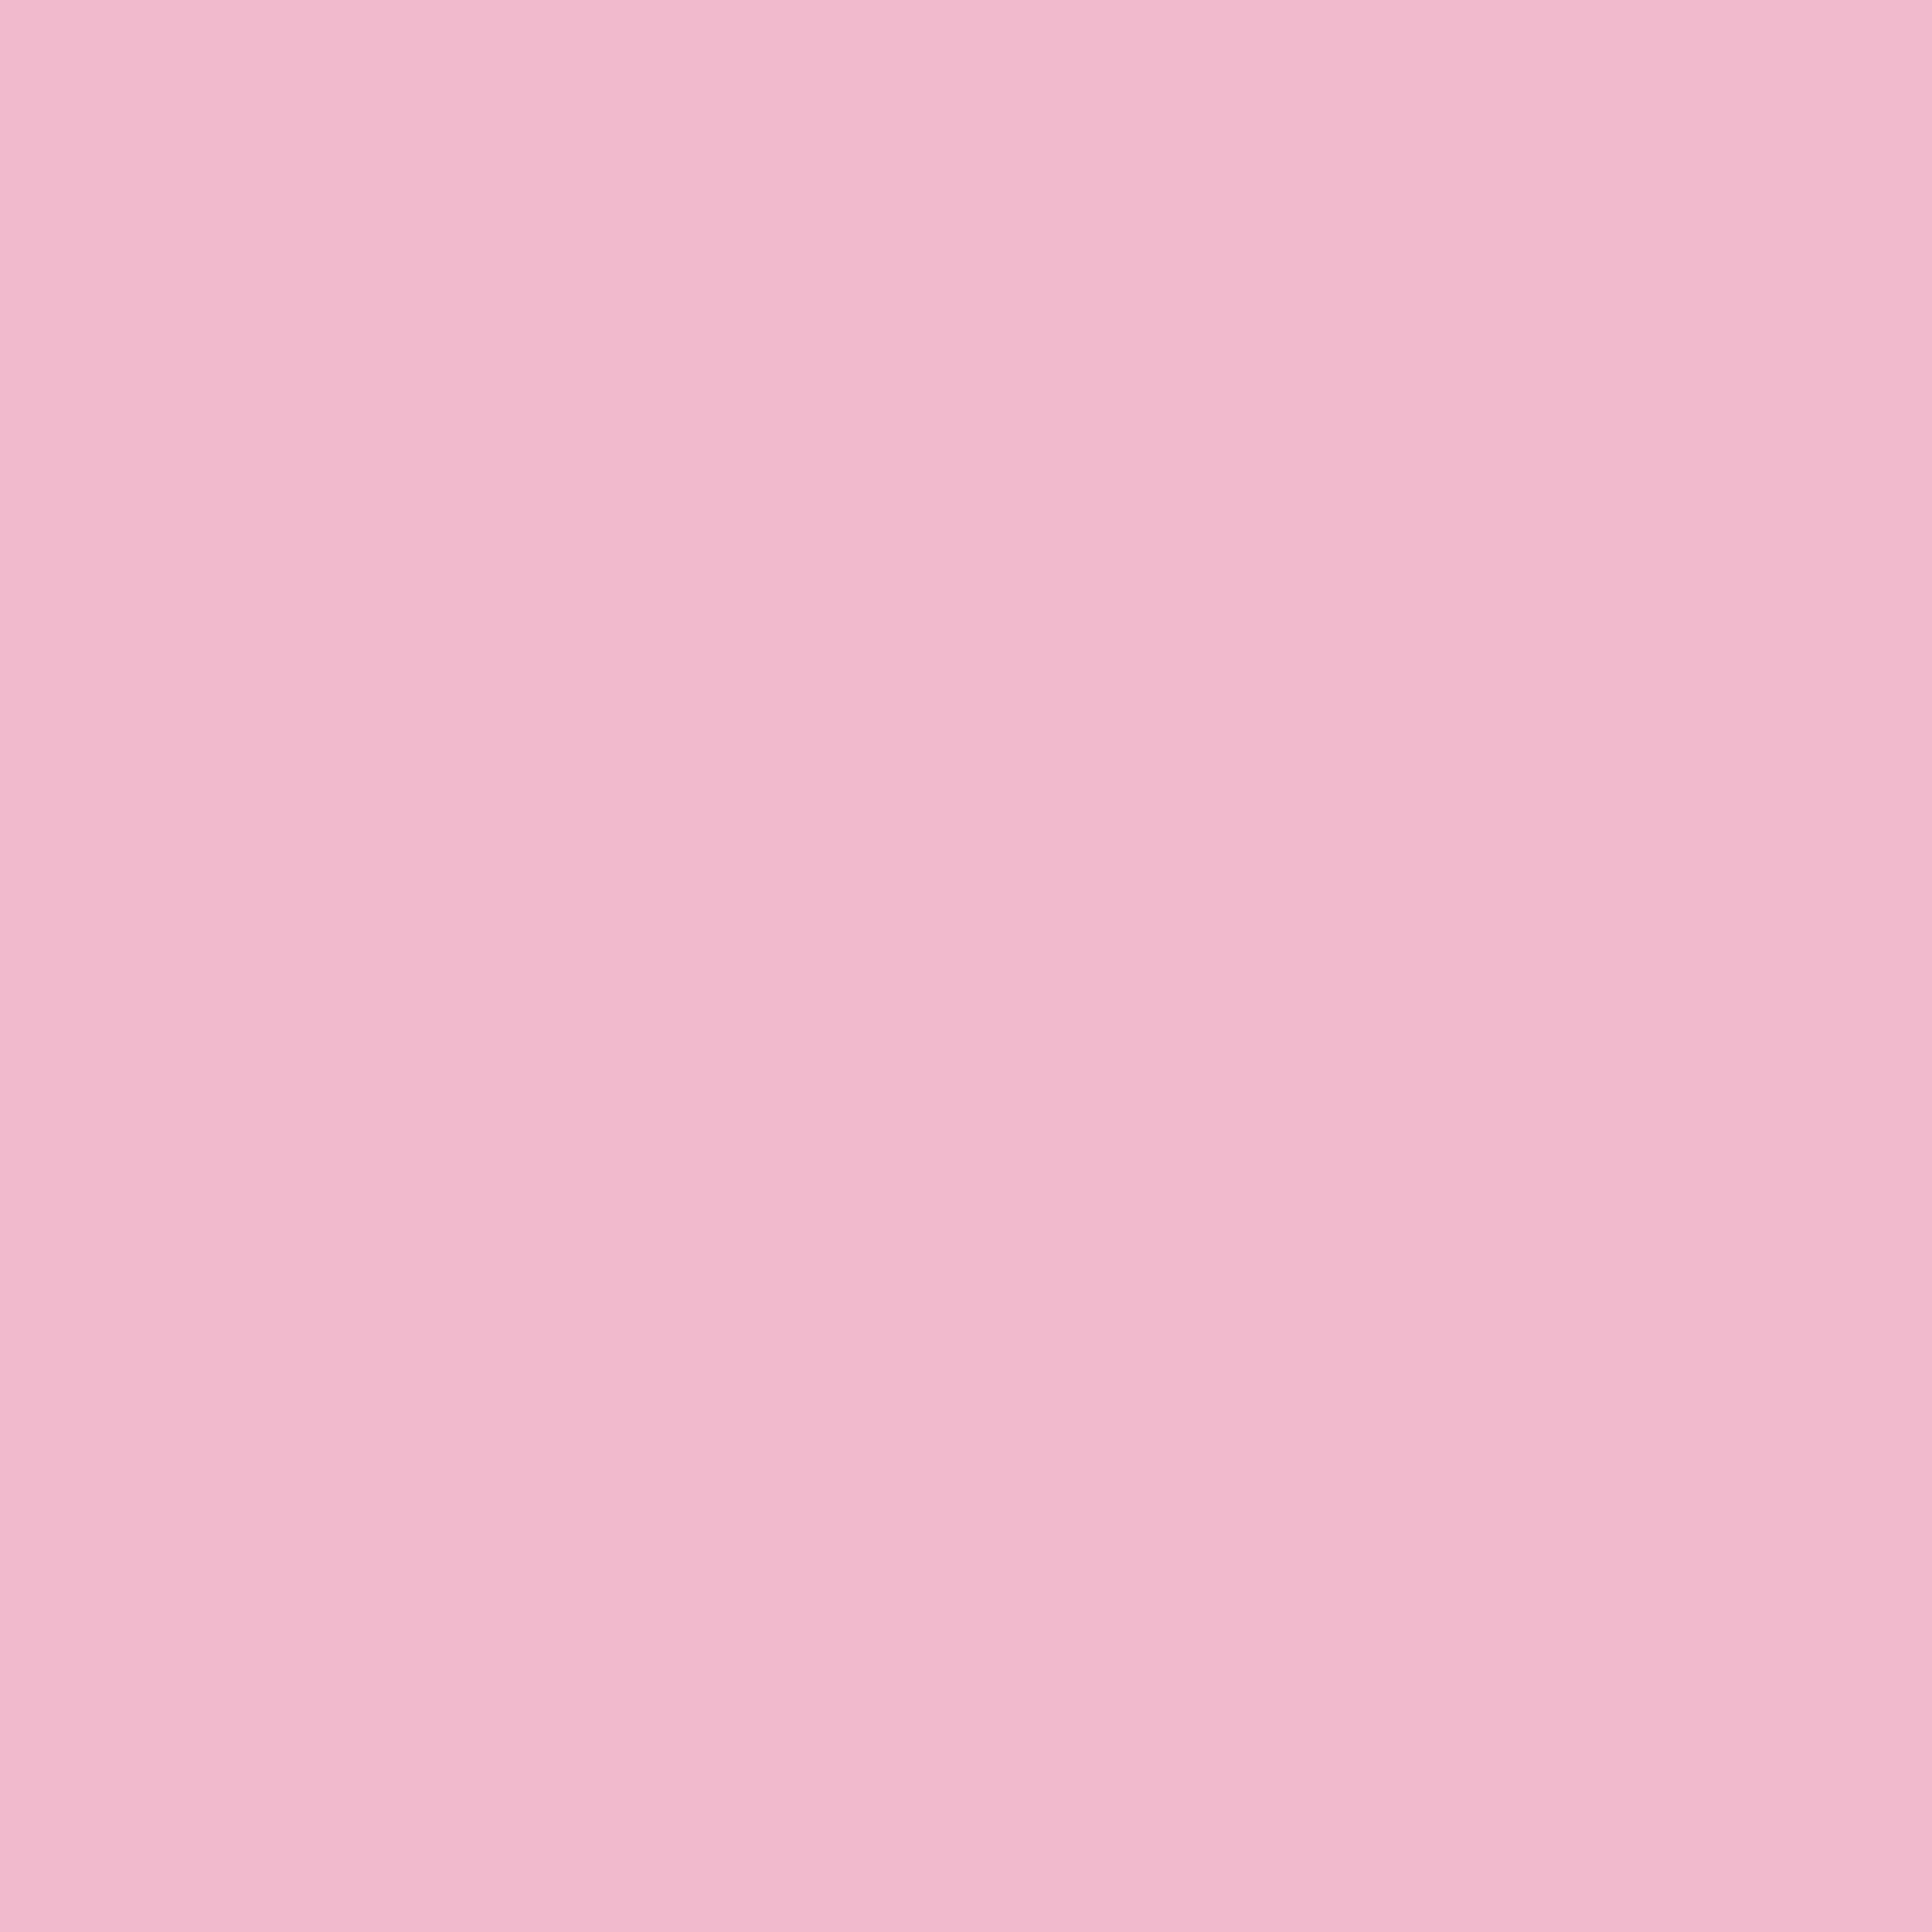 2732x2732 Cameo Pink Solid Color Background